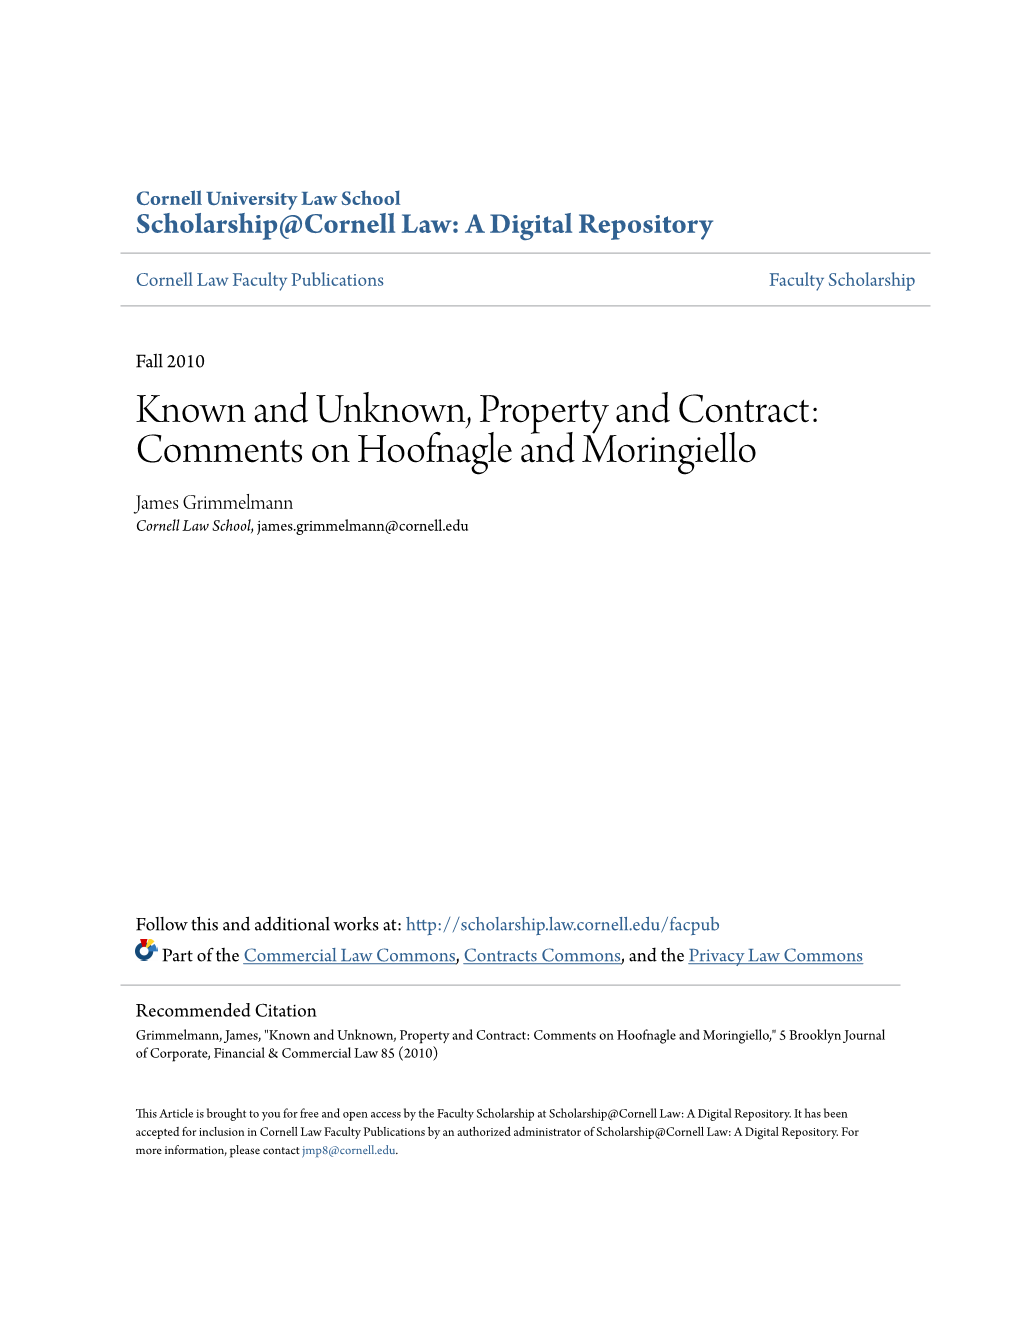 Known and Unknown, Property and Contract: Comments on Hoofnagle and Moringiello James Grimmelmann Cornell Law School, James.Grimmelmann@Cornell.Edu